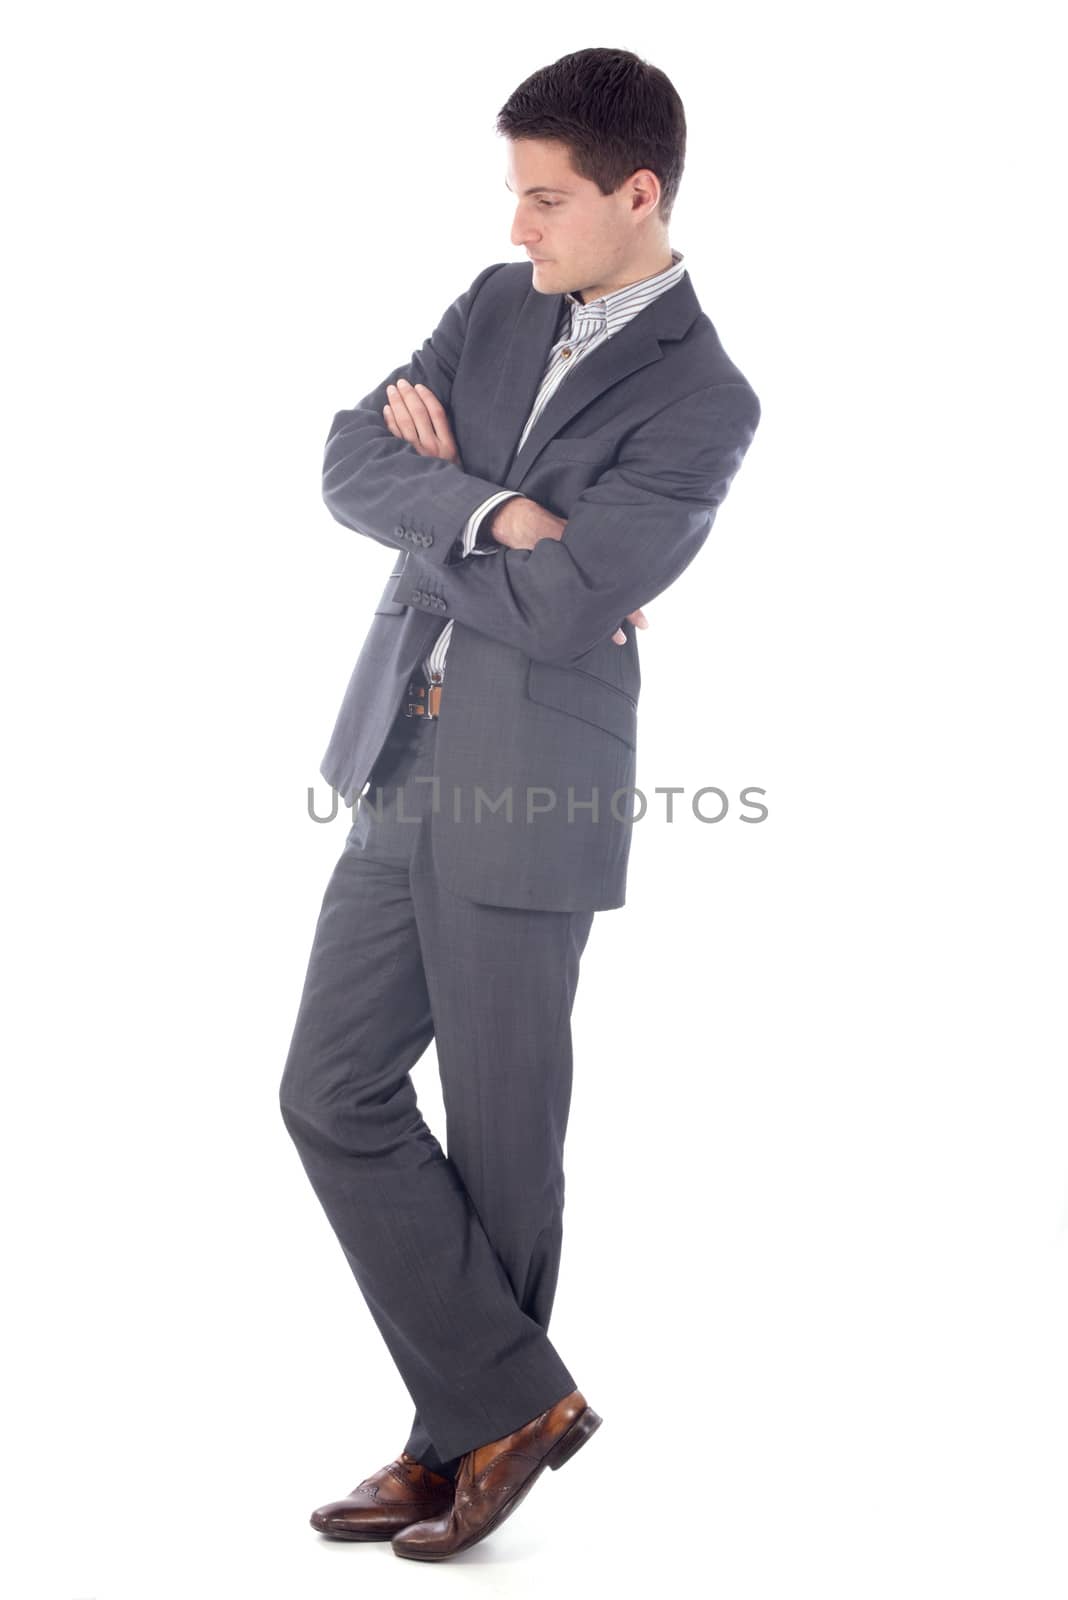 young business man worried  in front of white background